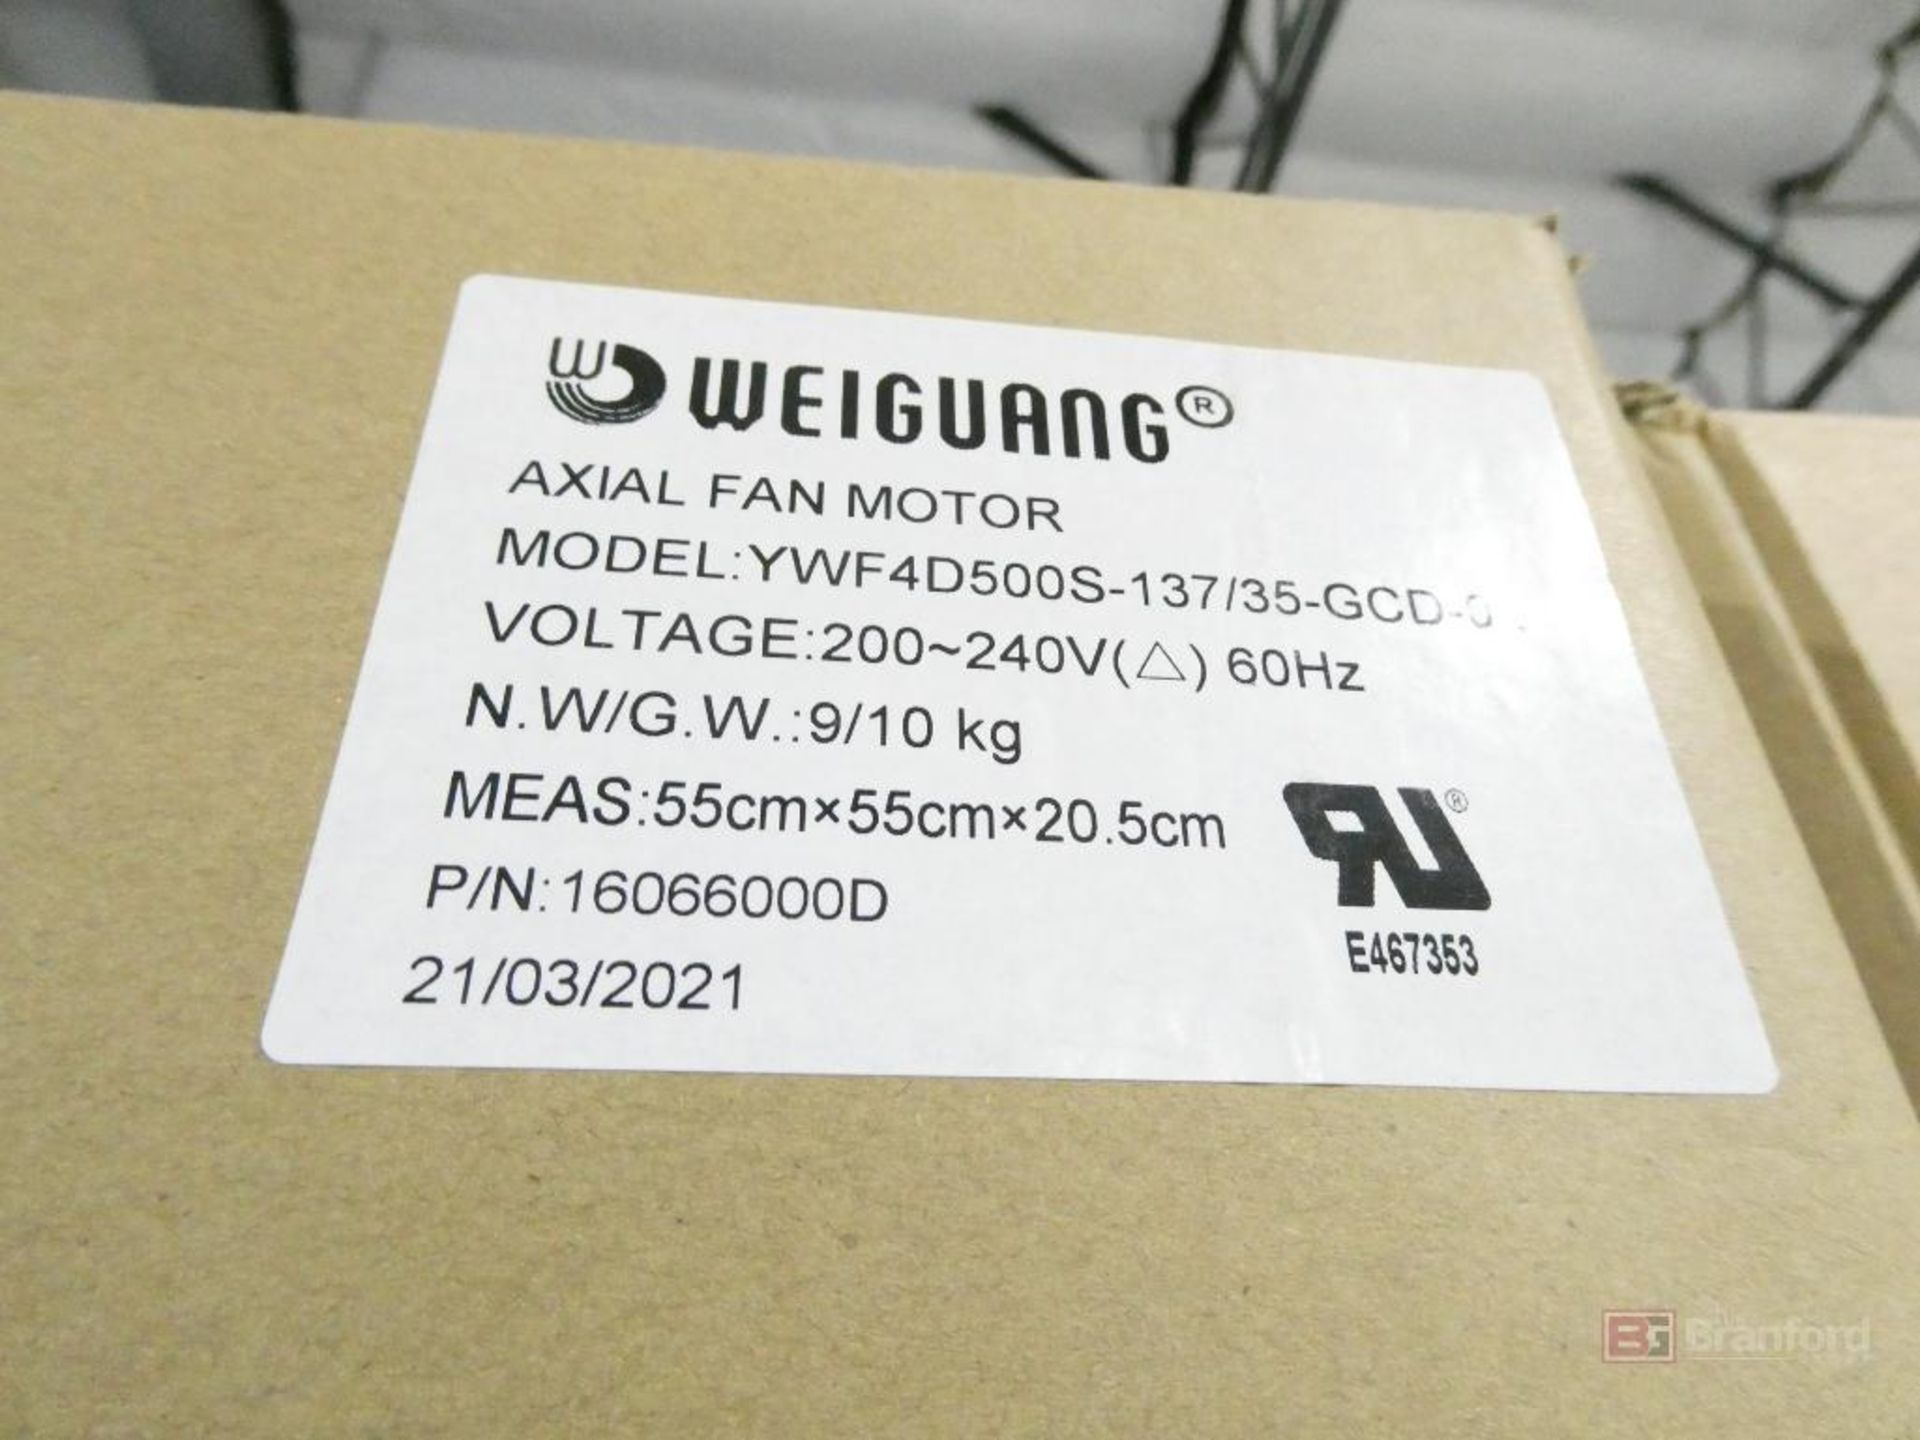 (6) Weiguang Model YWF4D500S-137, Axial Fans (New)